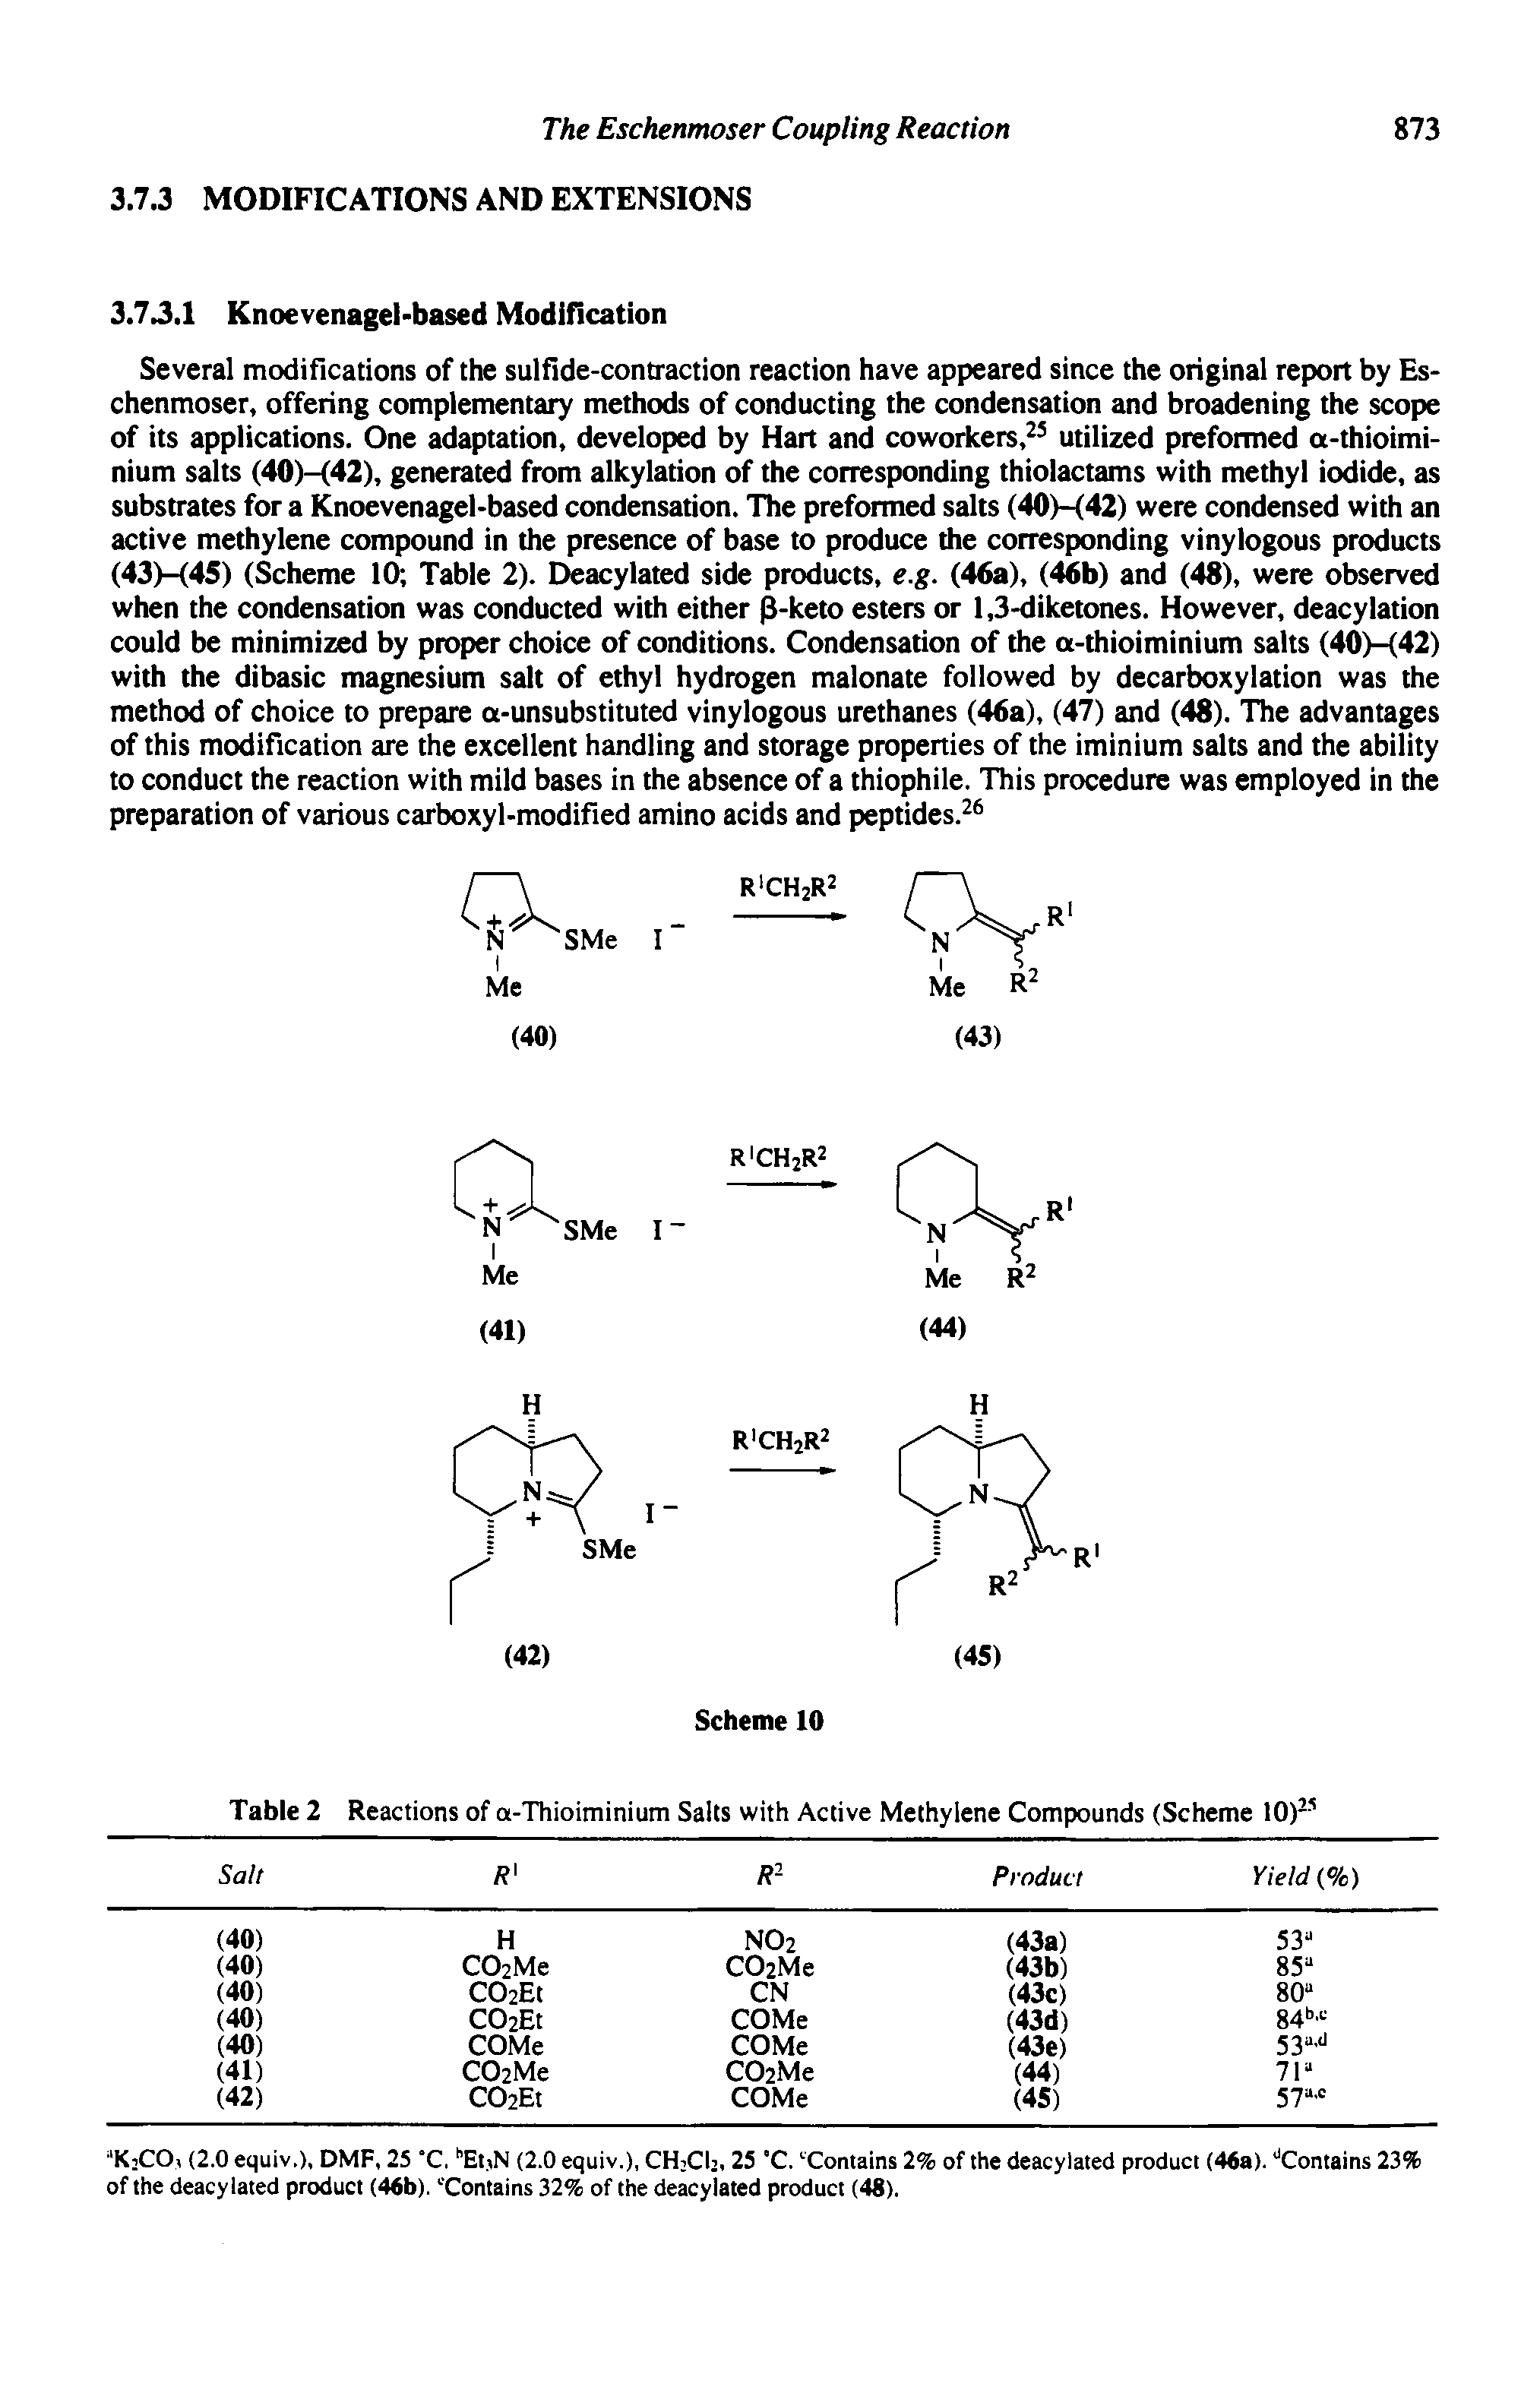 Table 2 Reactions of a-Thioiminium Salts with Active Methylene Compounds (Scheme 10)- ...